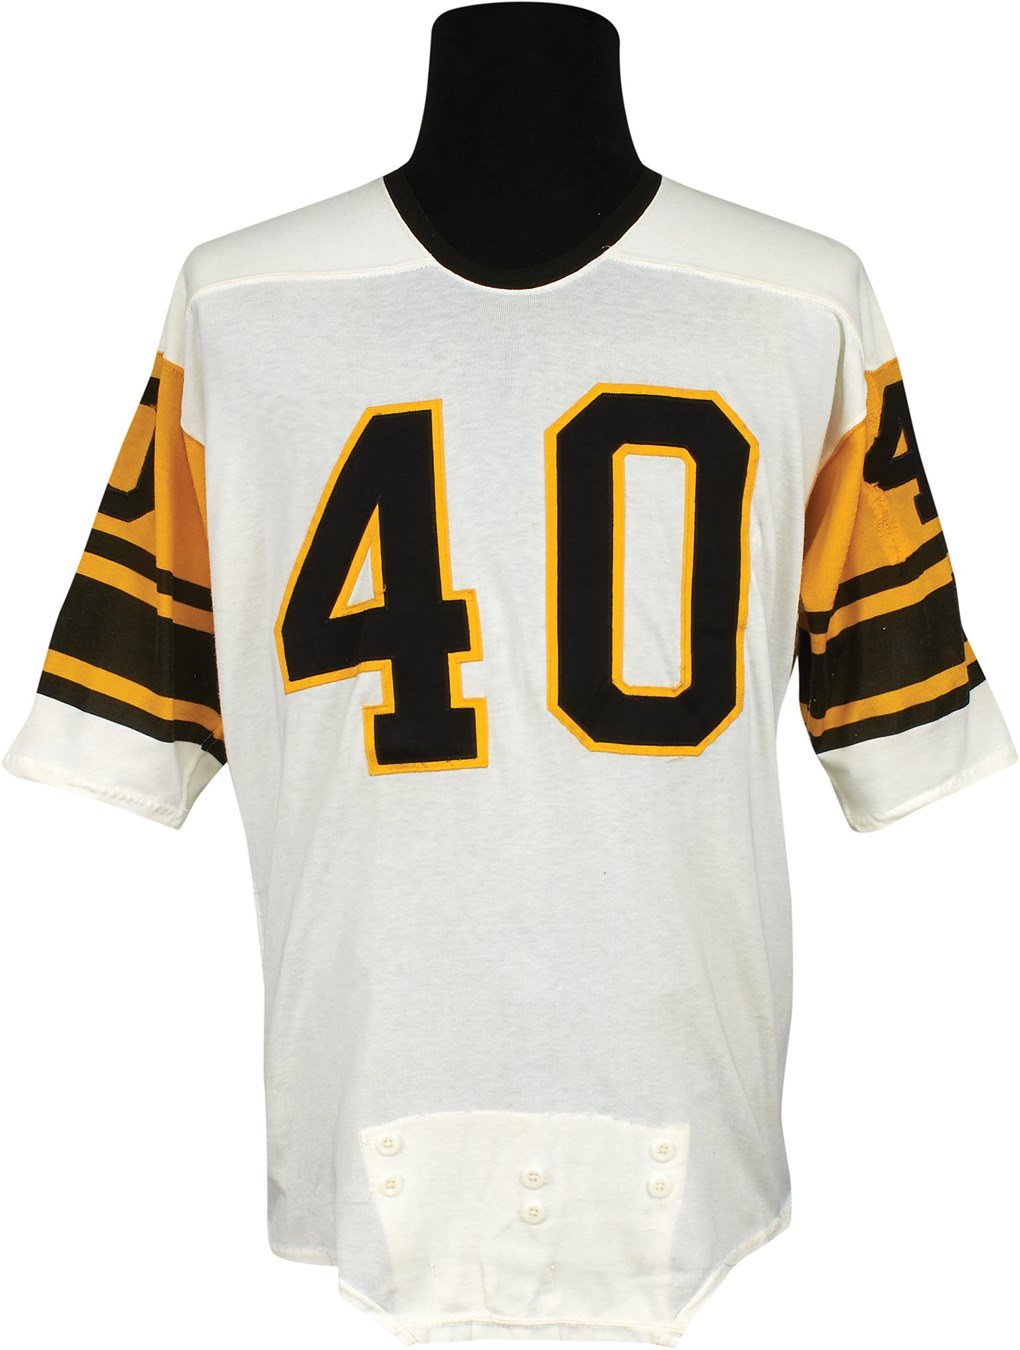 The Pittsburgh Steelers Game Worn Jersey Archive - 1962-63 Preston Carpenter Pittsburgh Steelers Game Worn Jersey